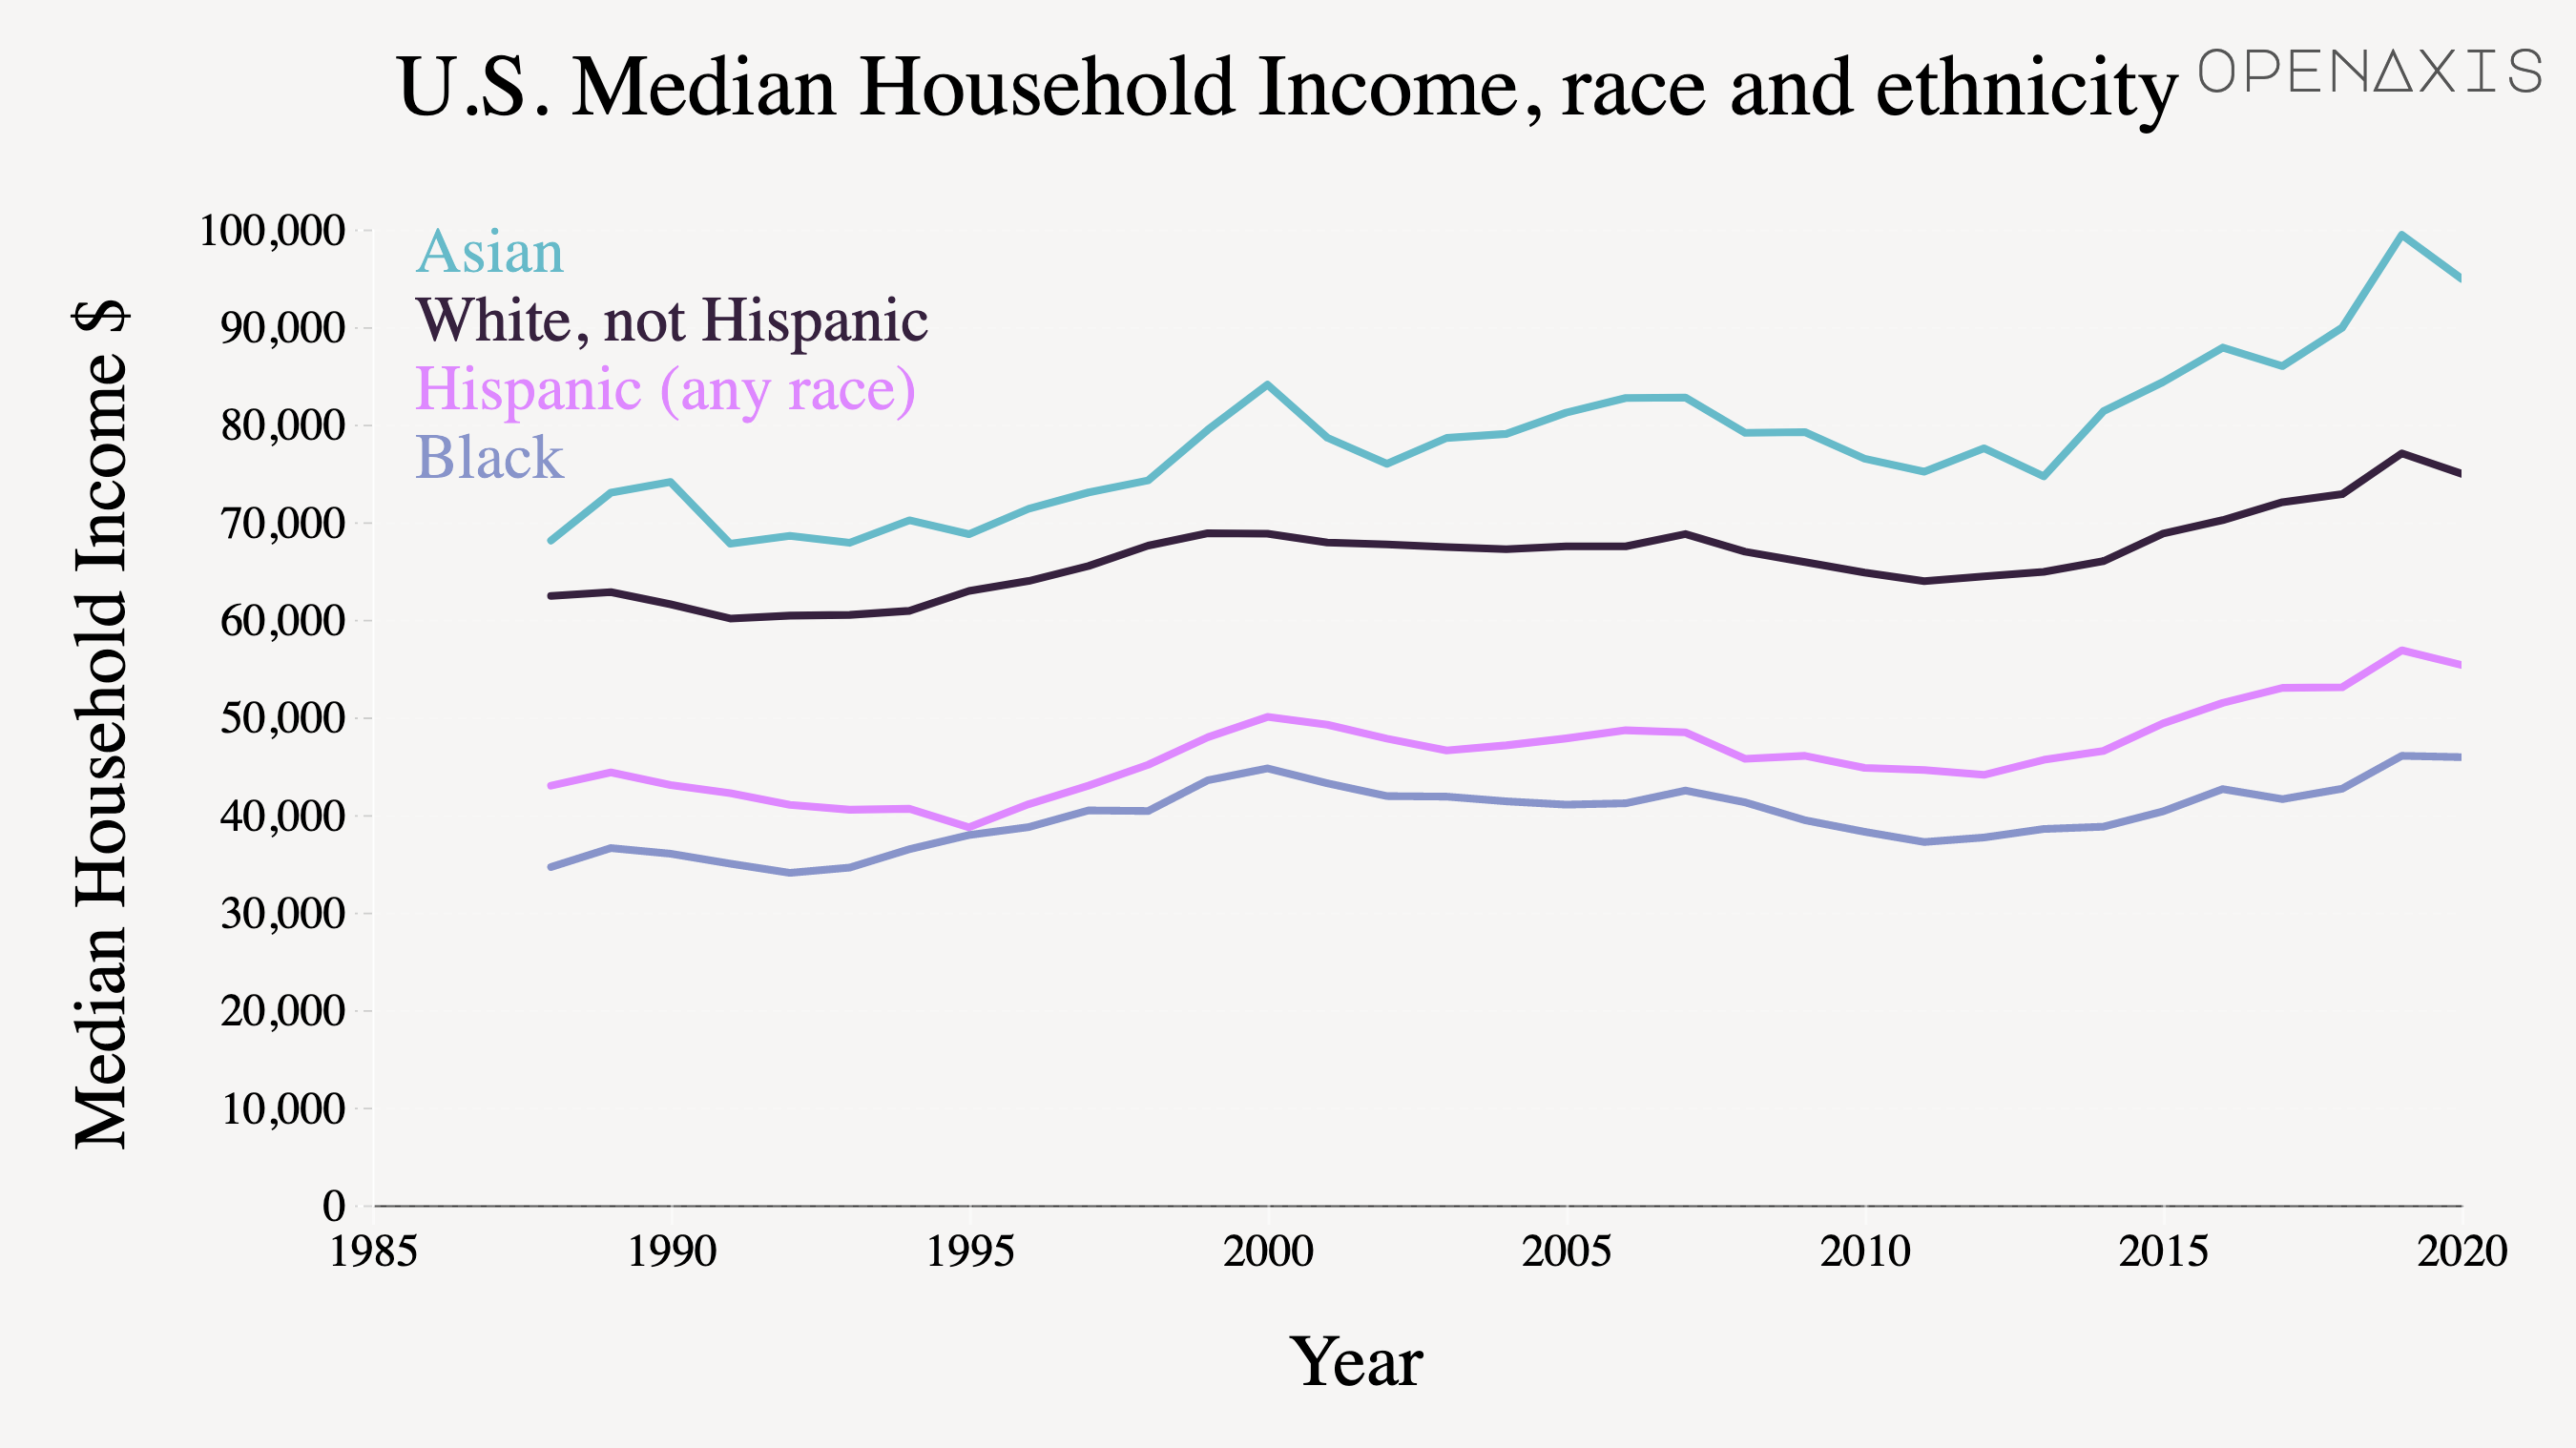 "U.S. Median Household Income, race and ethnicity"